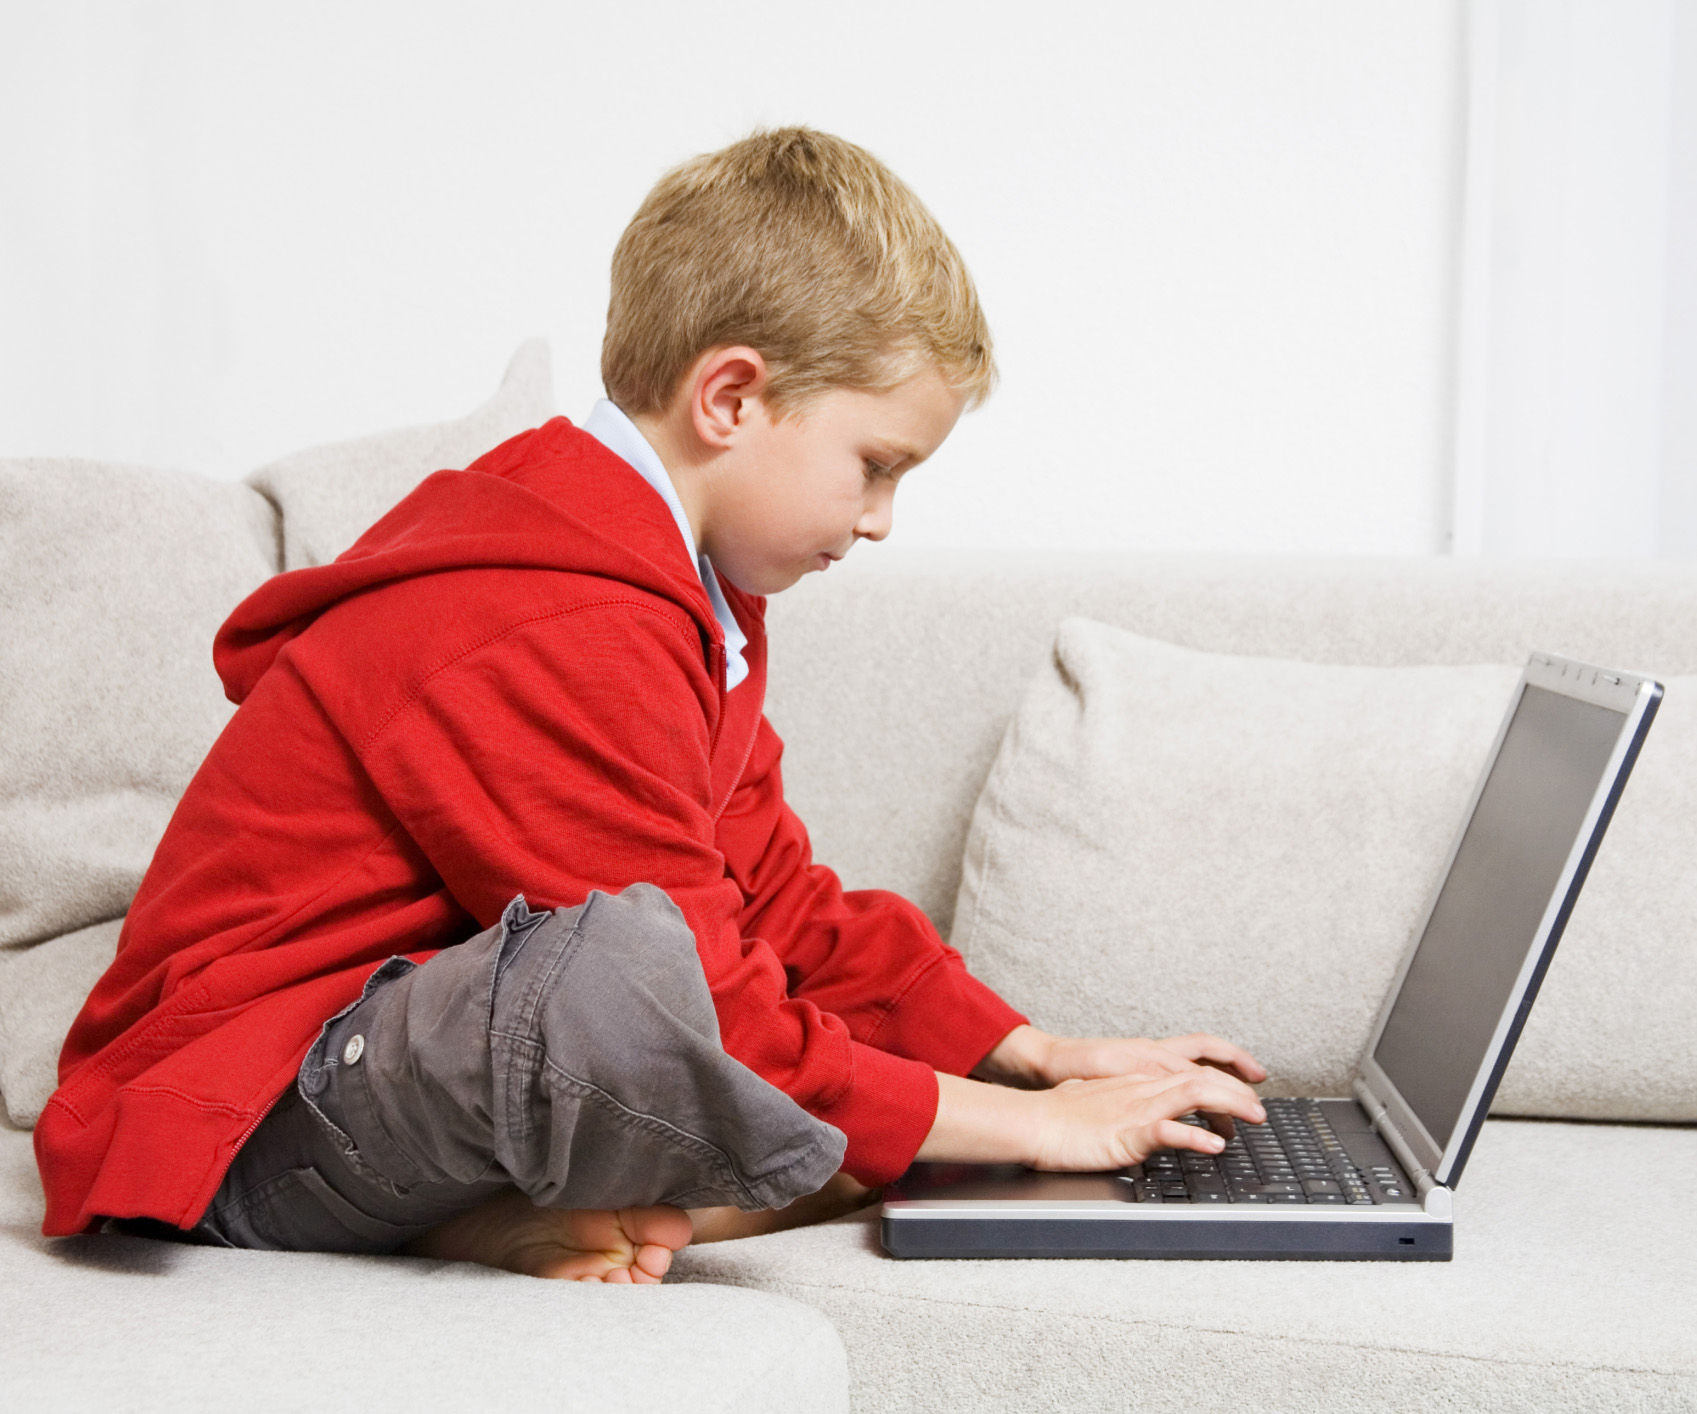 How to keep your kids safe on the Internet